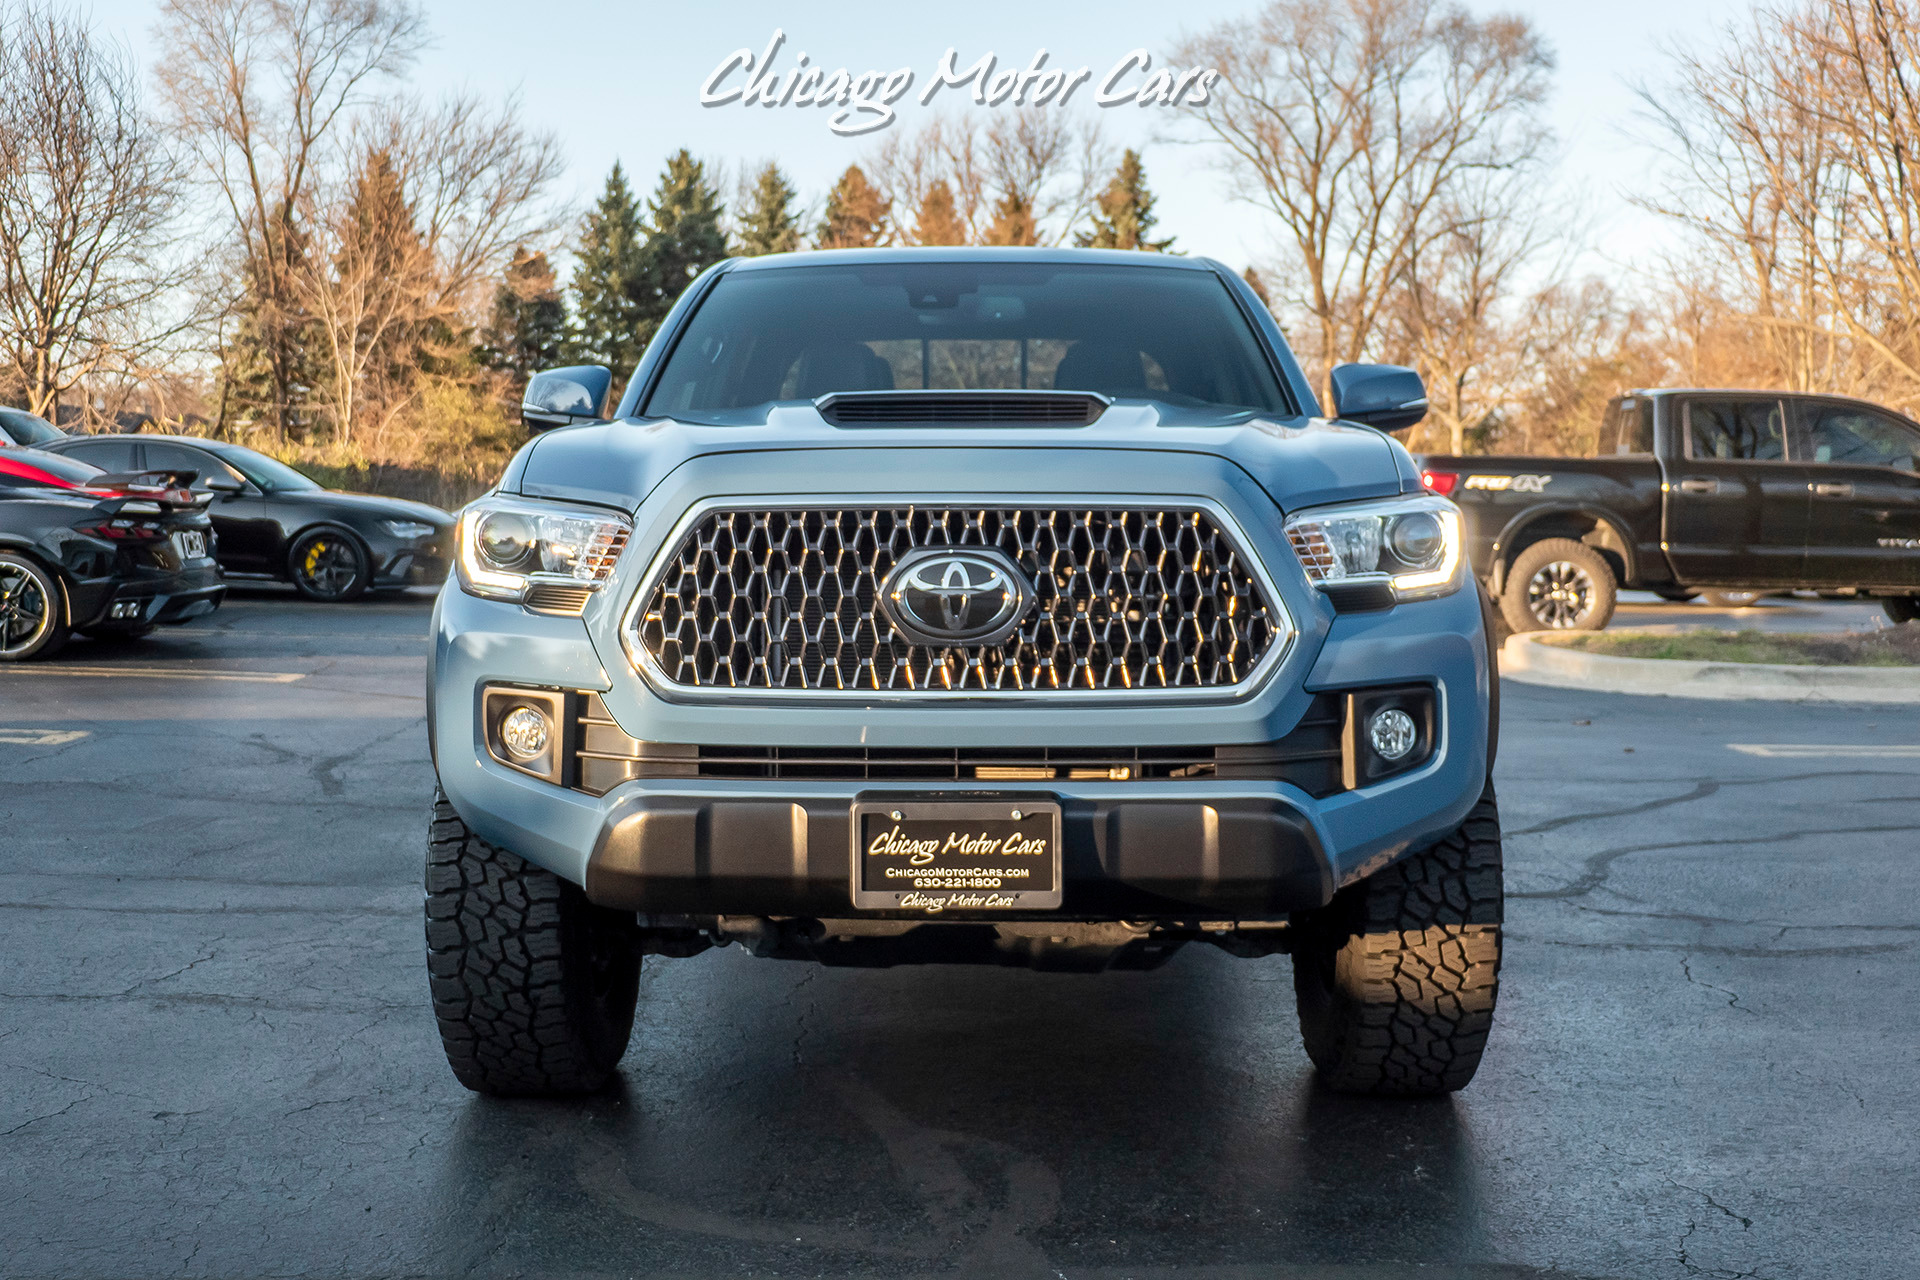 Used-2019-Toyota-Tacoma-TRD-Off-Road-4x4-Lifted-with-Upgraded-Tires-RARE-Calvary-Blue